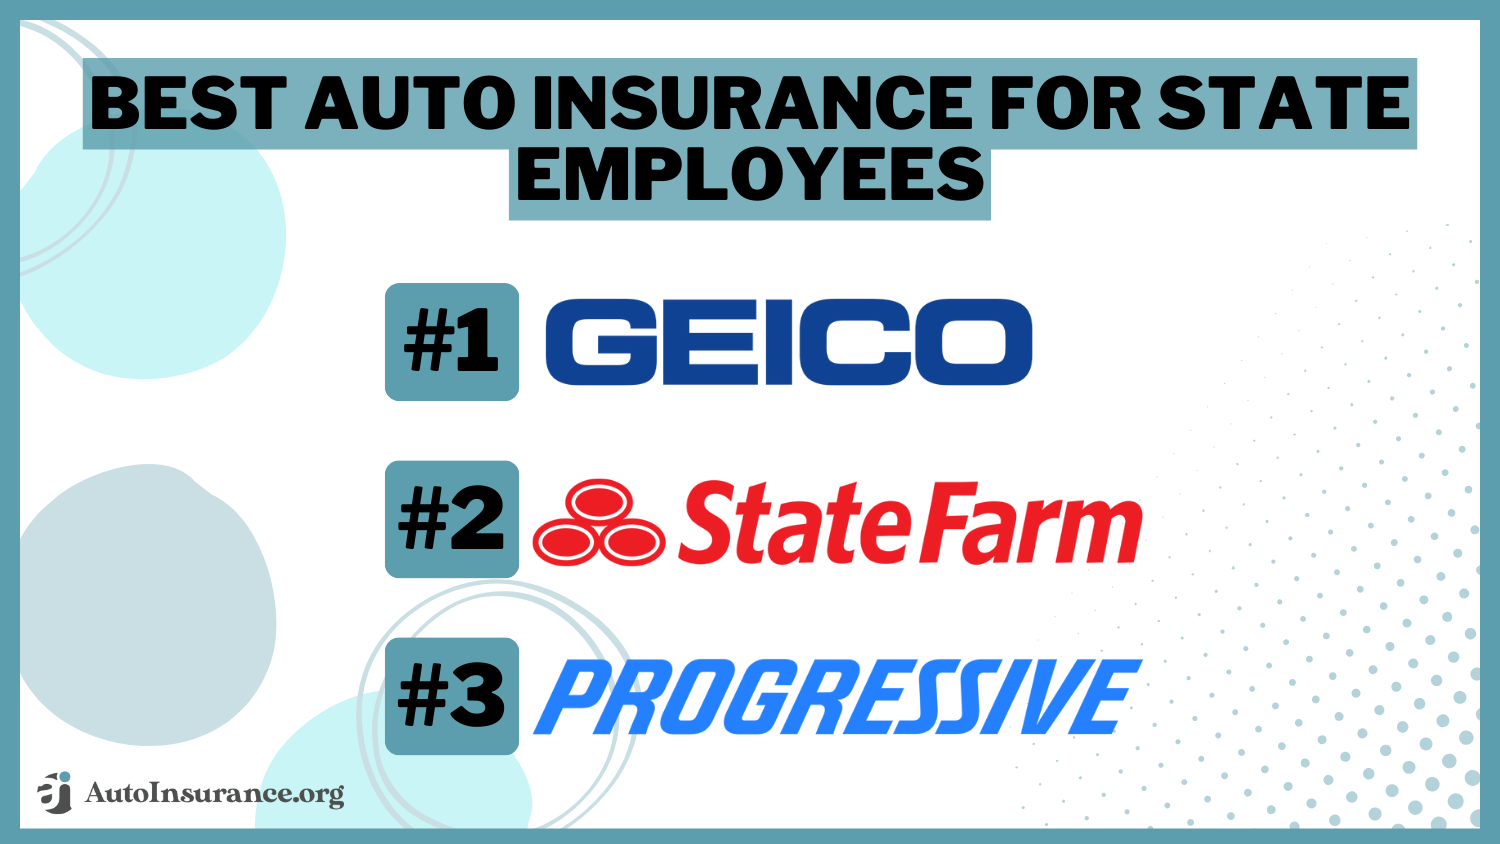 Best Auto Insurance for State Employees: Geico, State Farm, Progressive